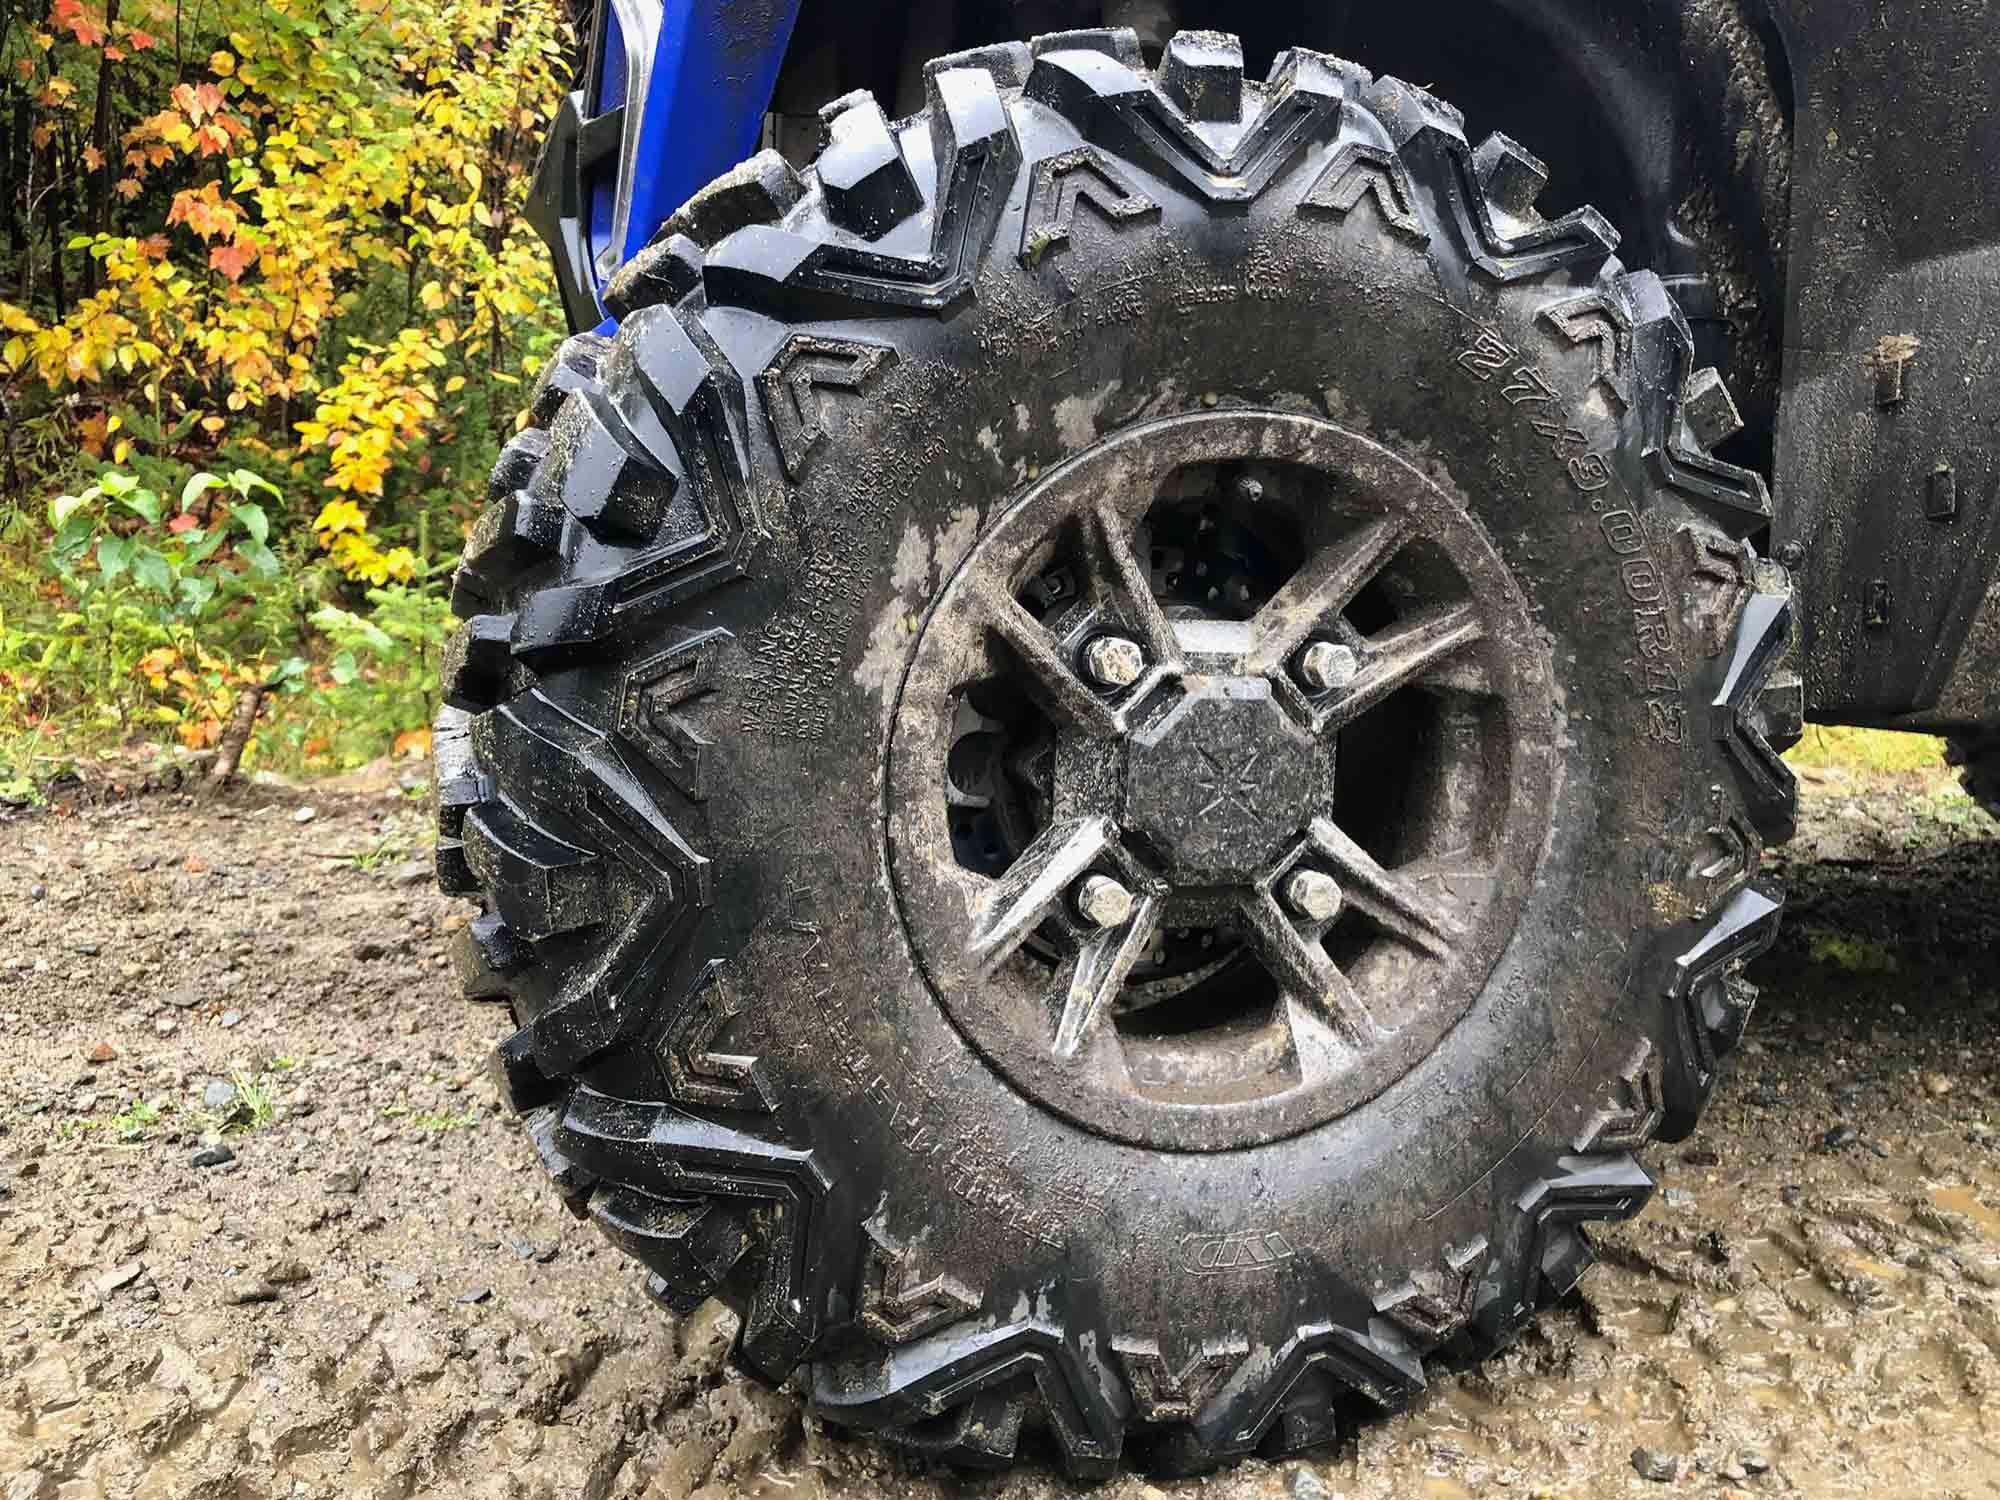 Aggressive 27-inch trail tires quickly turned into slicks when balled up with mud.